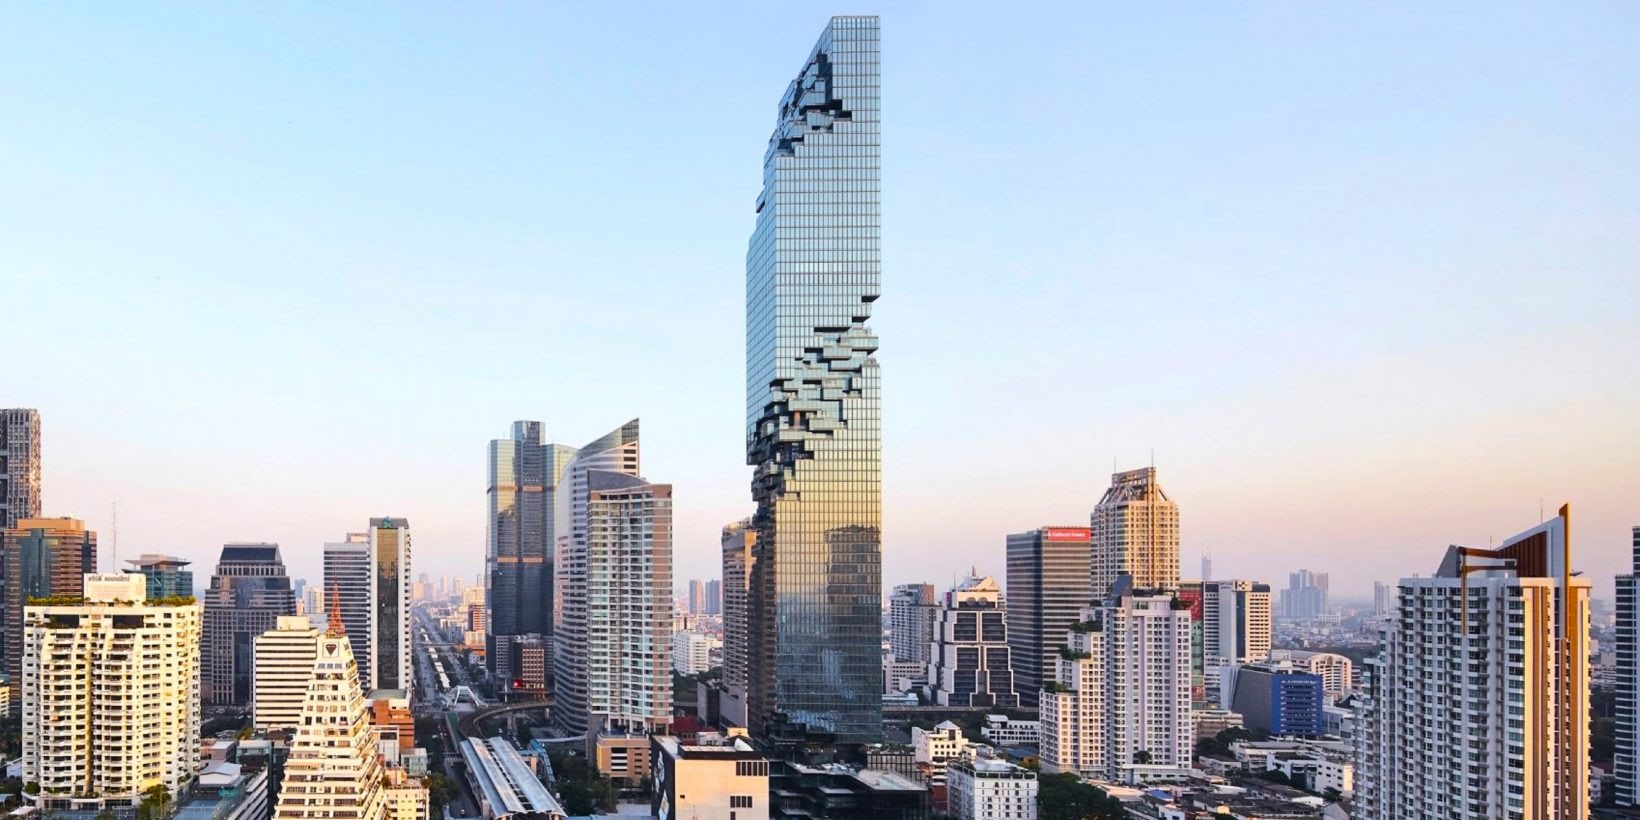 Giant skyscrapers trend back on track